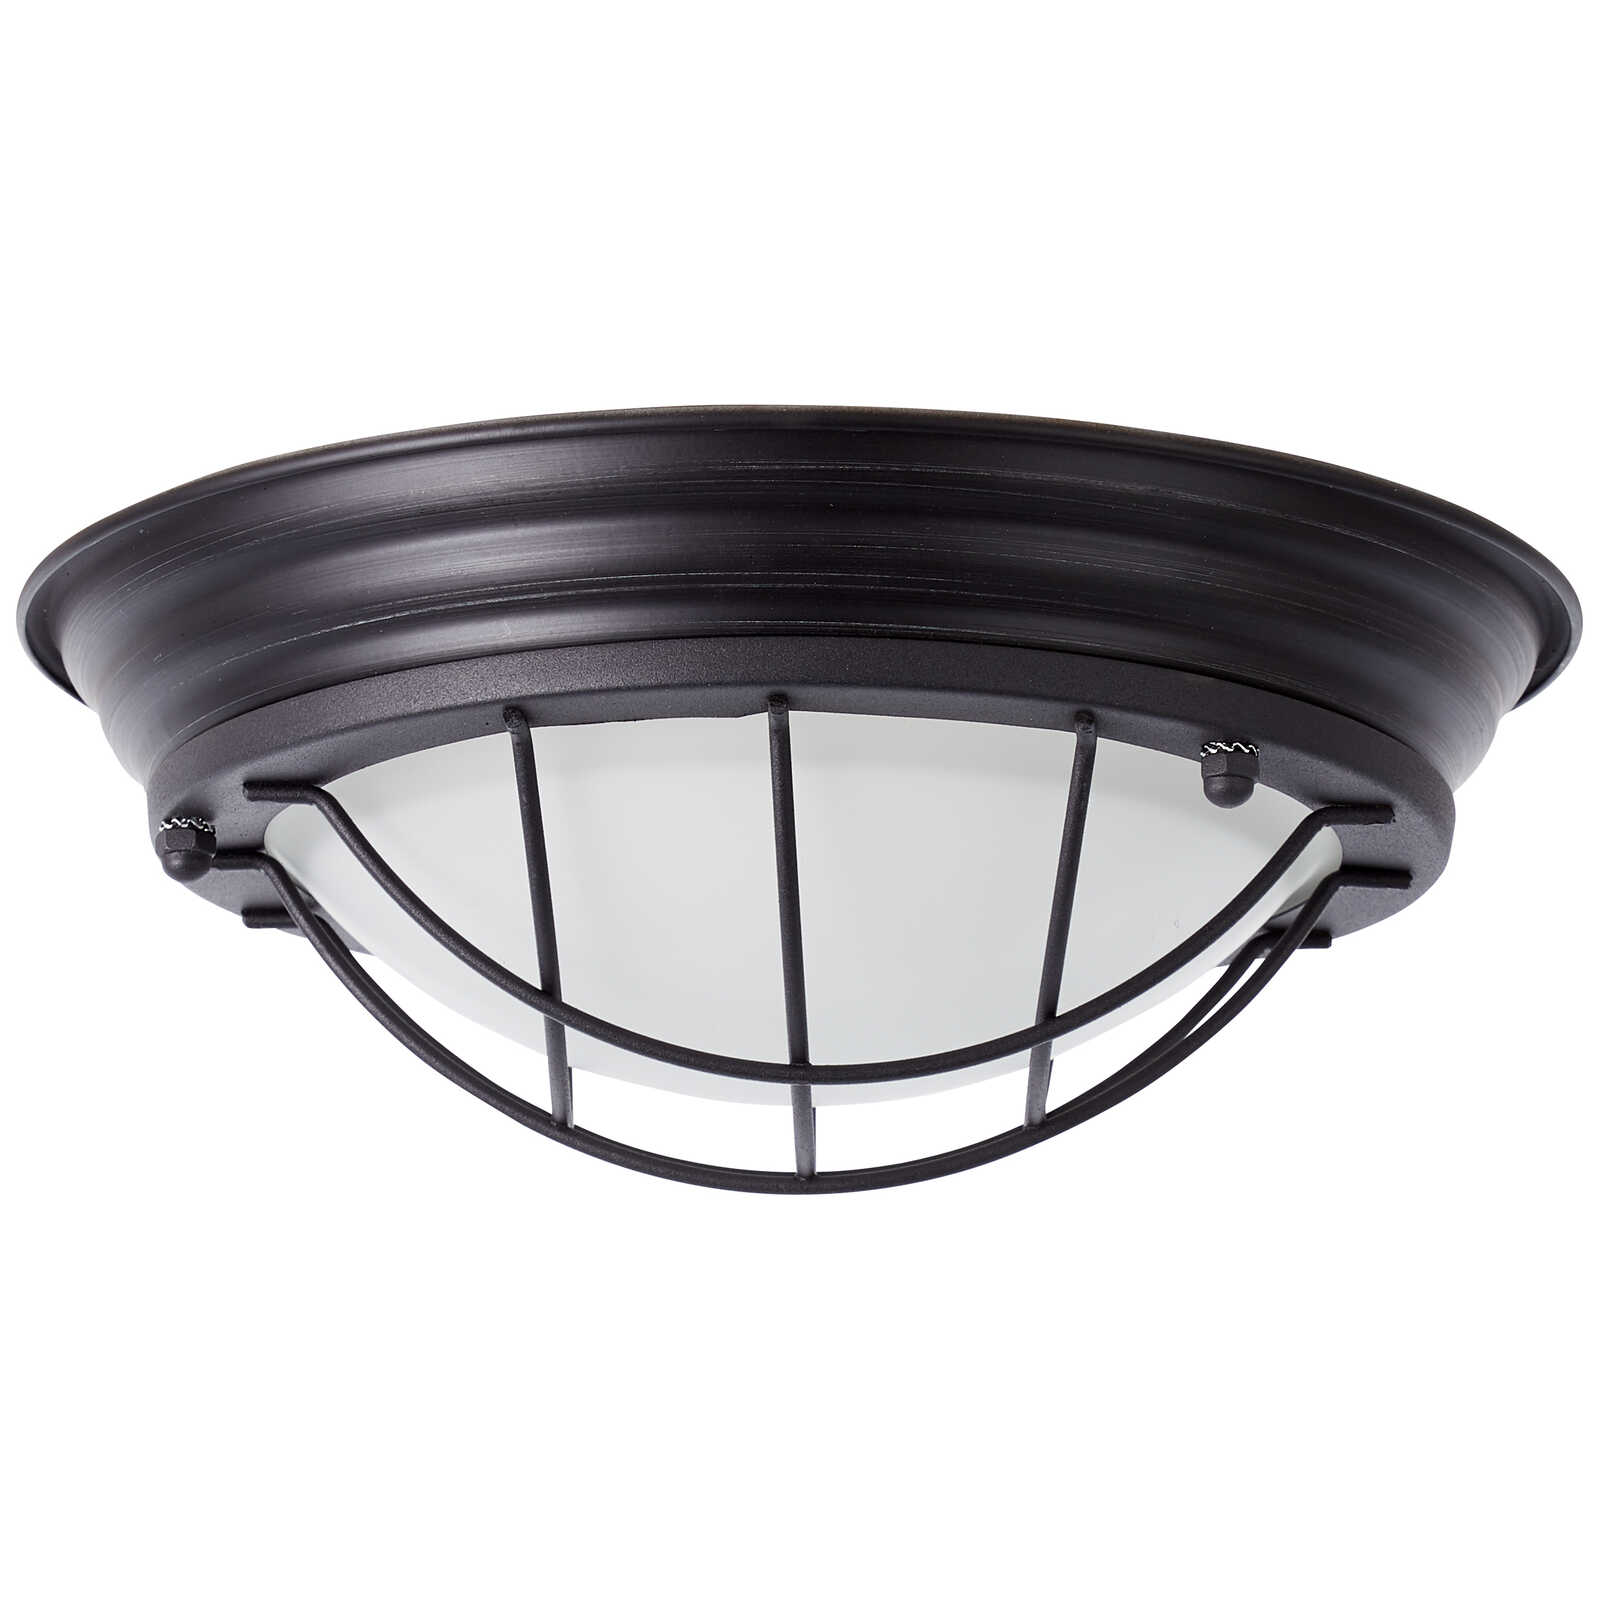             Metal wall and ceiling light - Sina 4 - Black
        